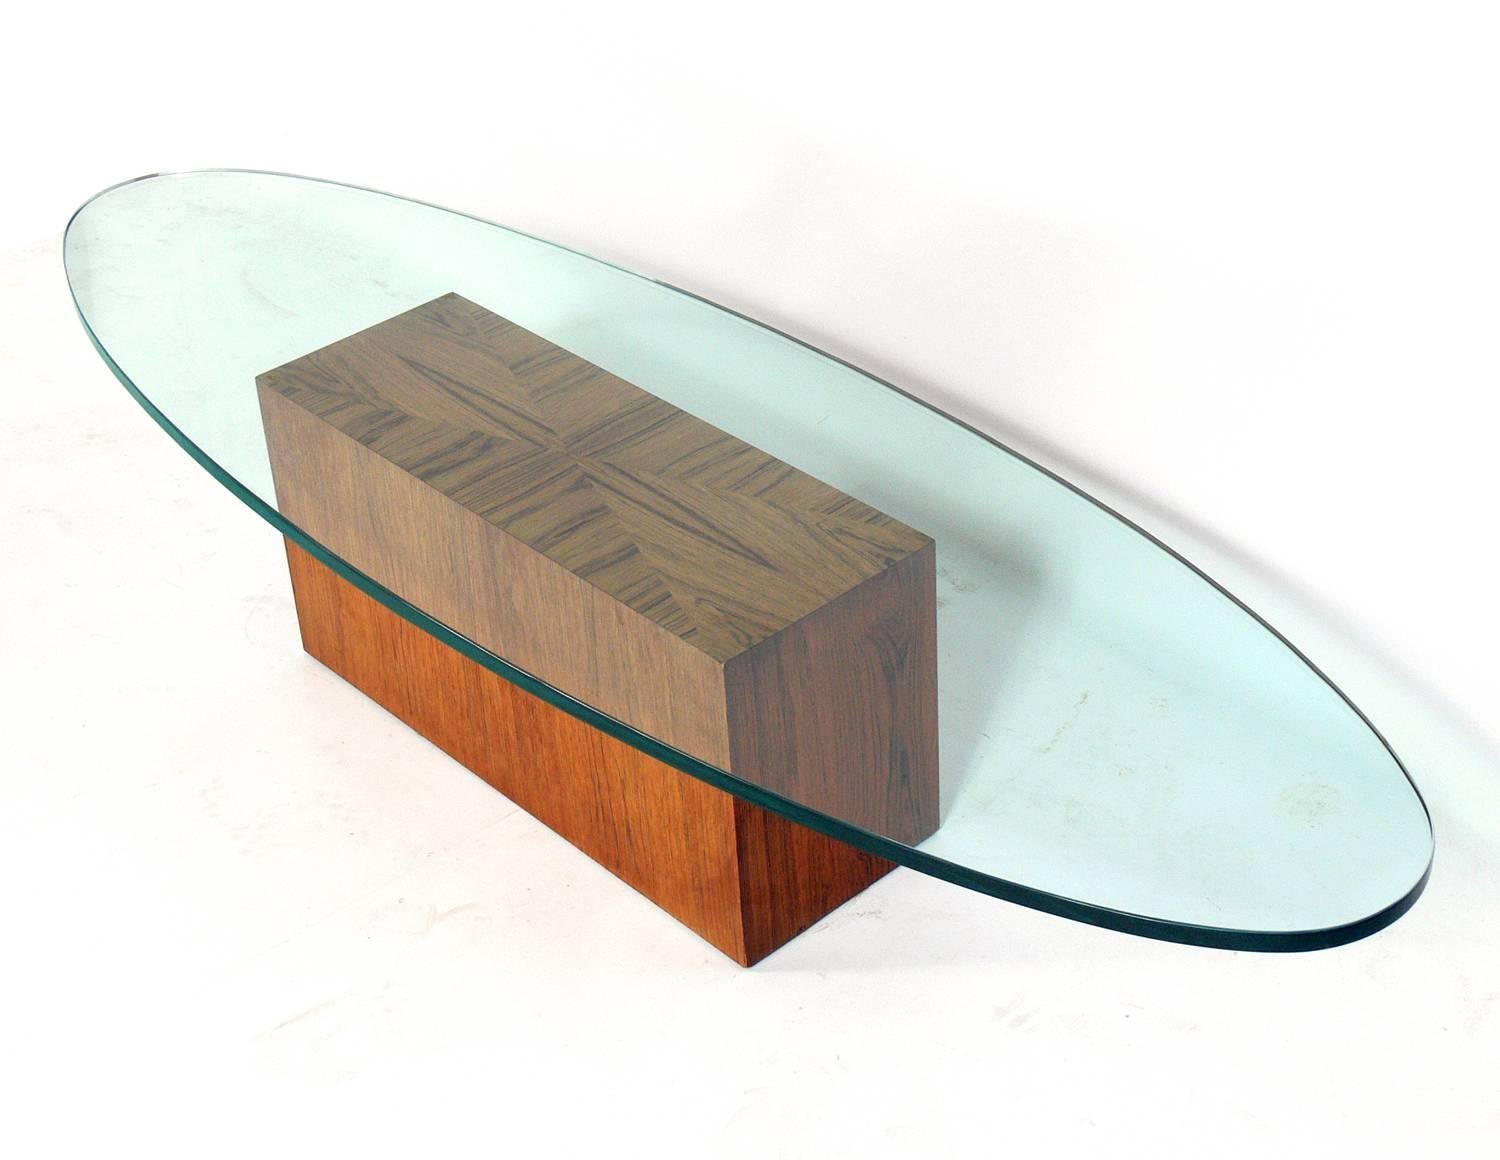 Rosewood and surfboard glass coffee table, designed by Harvey Probber, American, circa 1960s.